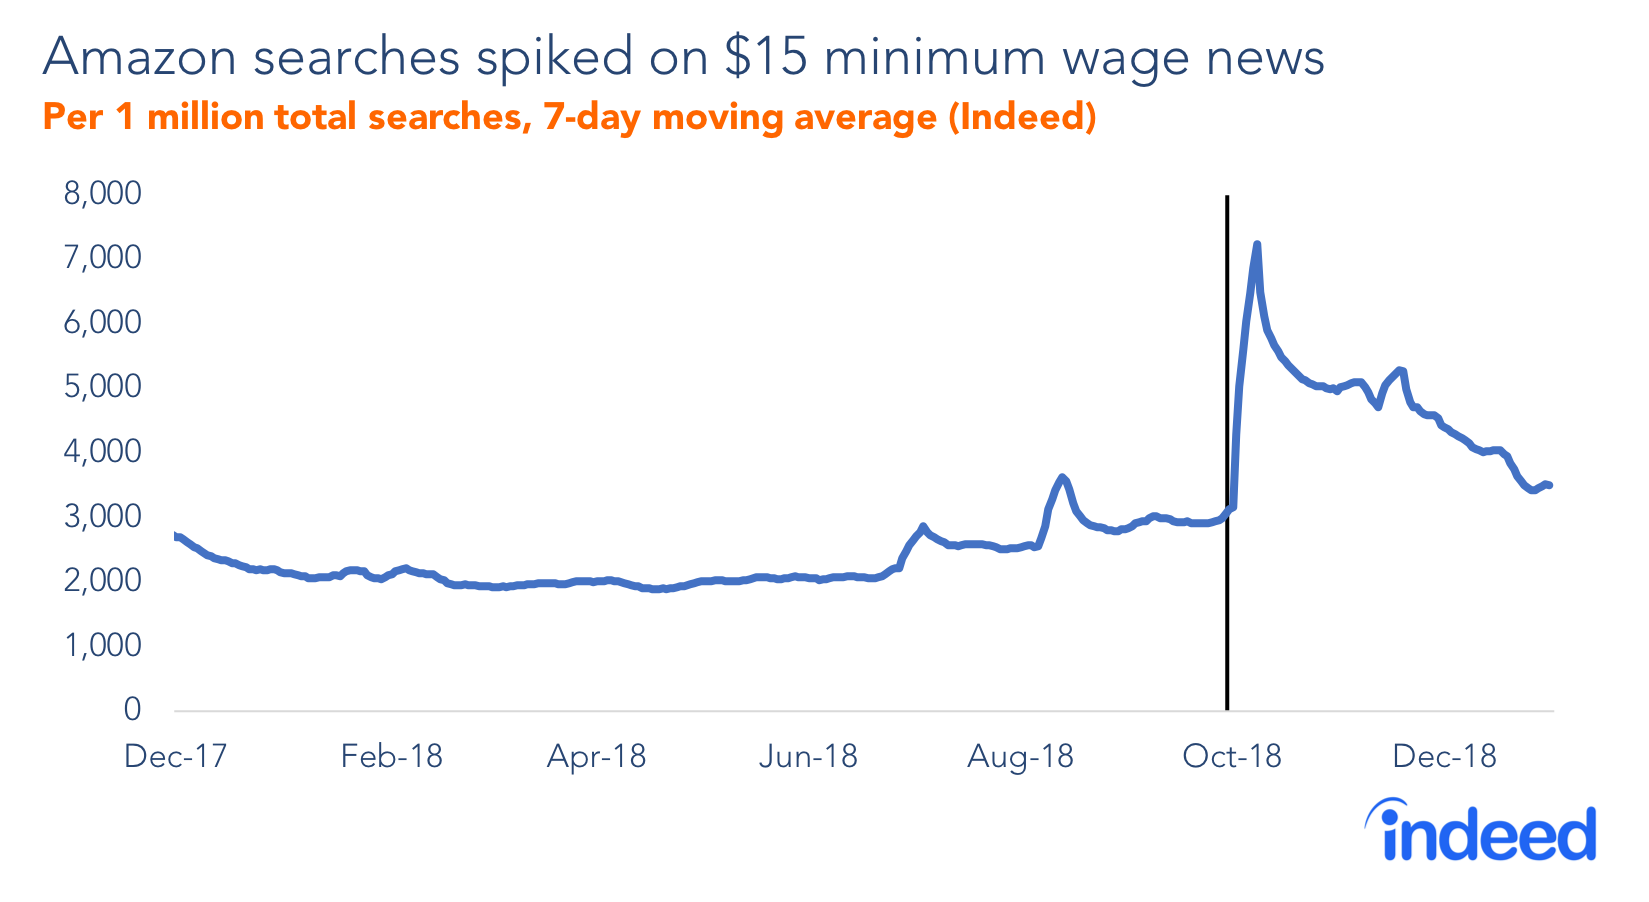 Amazon searches spiked on $15 minimum wage news